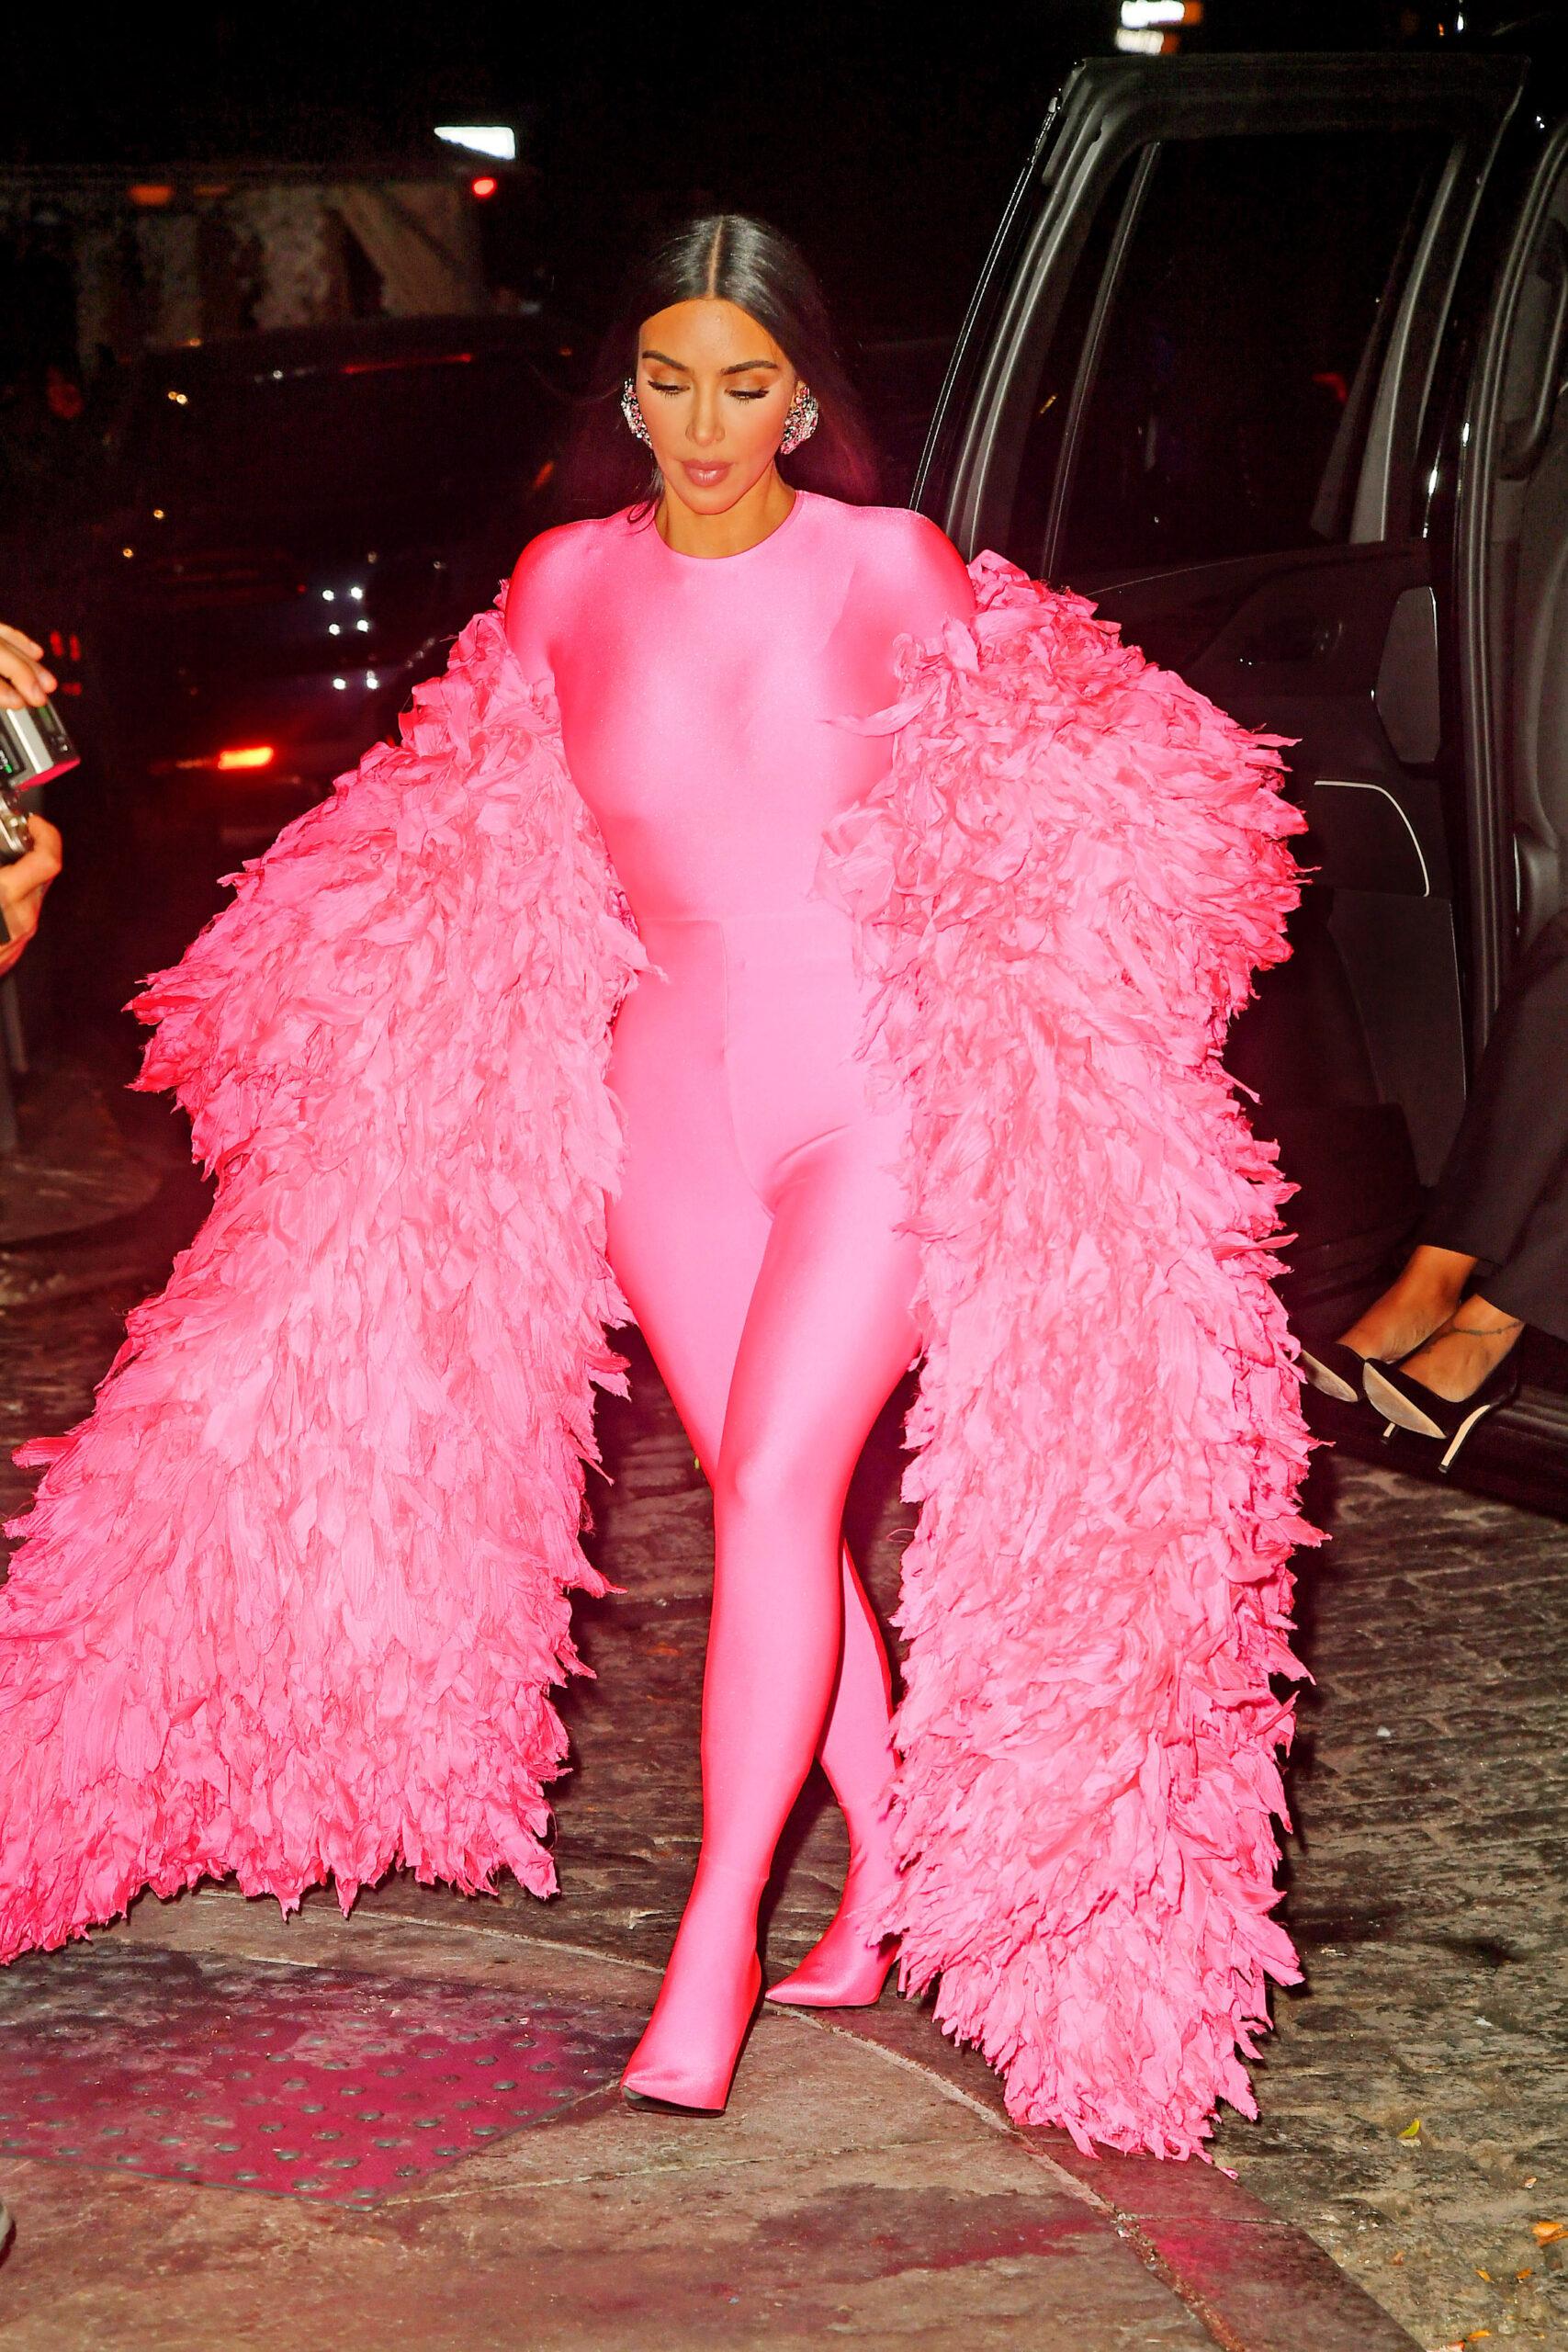 Kim Kardashian West arrives to the SNL after party in an all pink Balenciaga